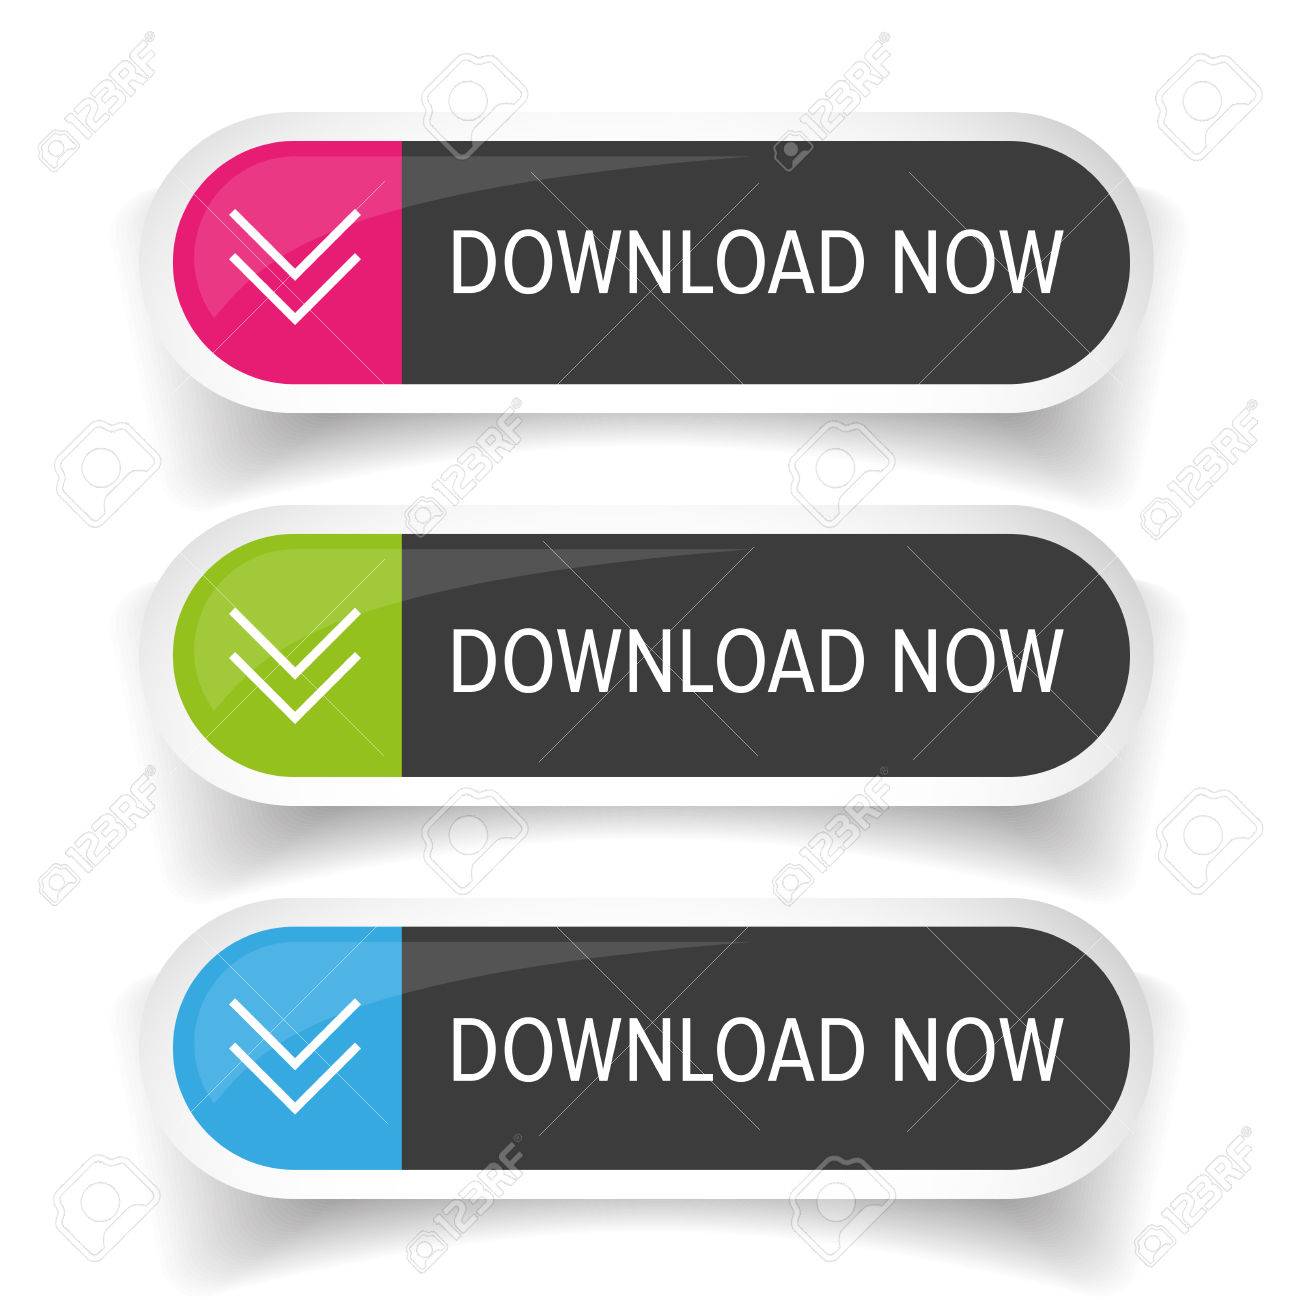 Download Now button set Stock Vector - 67225150